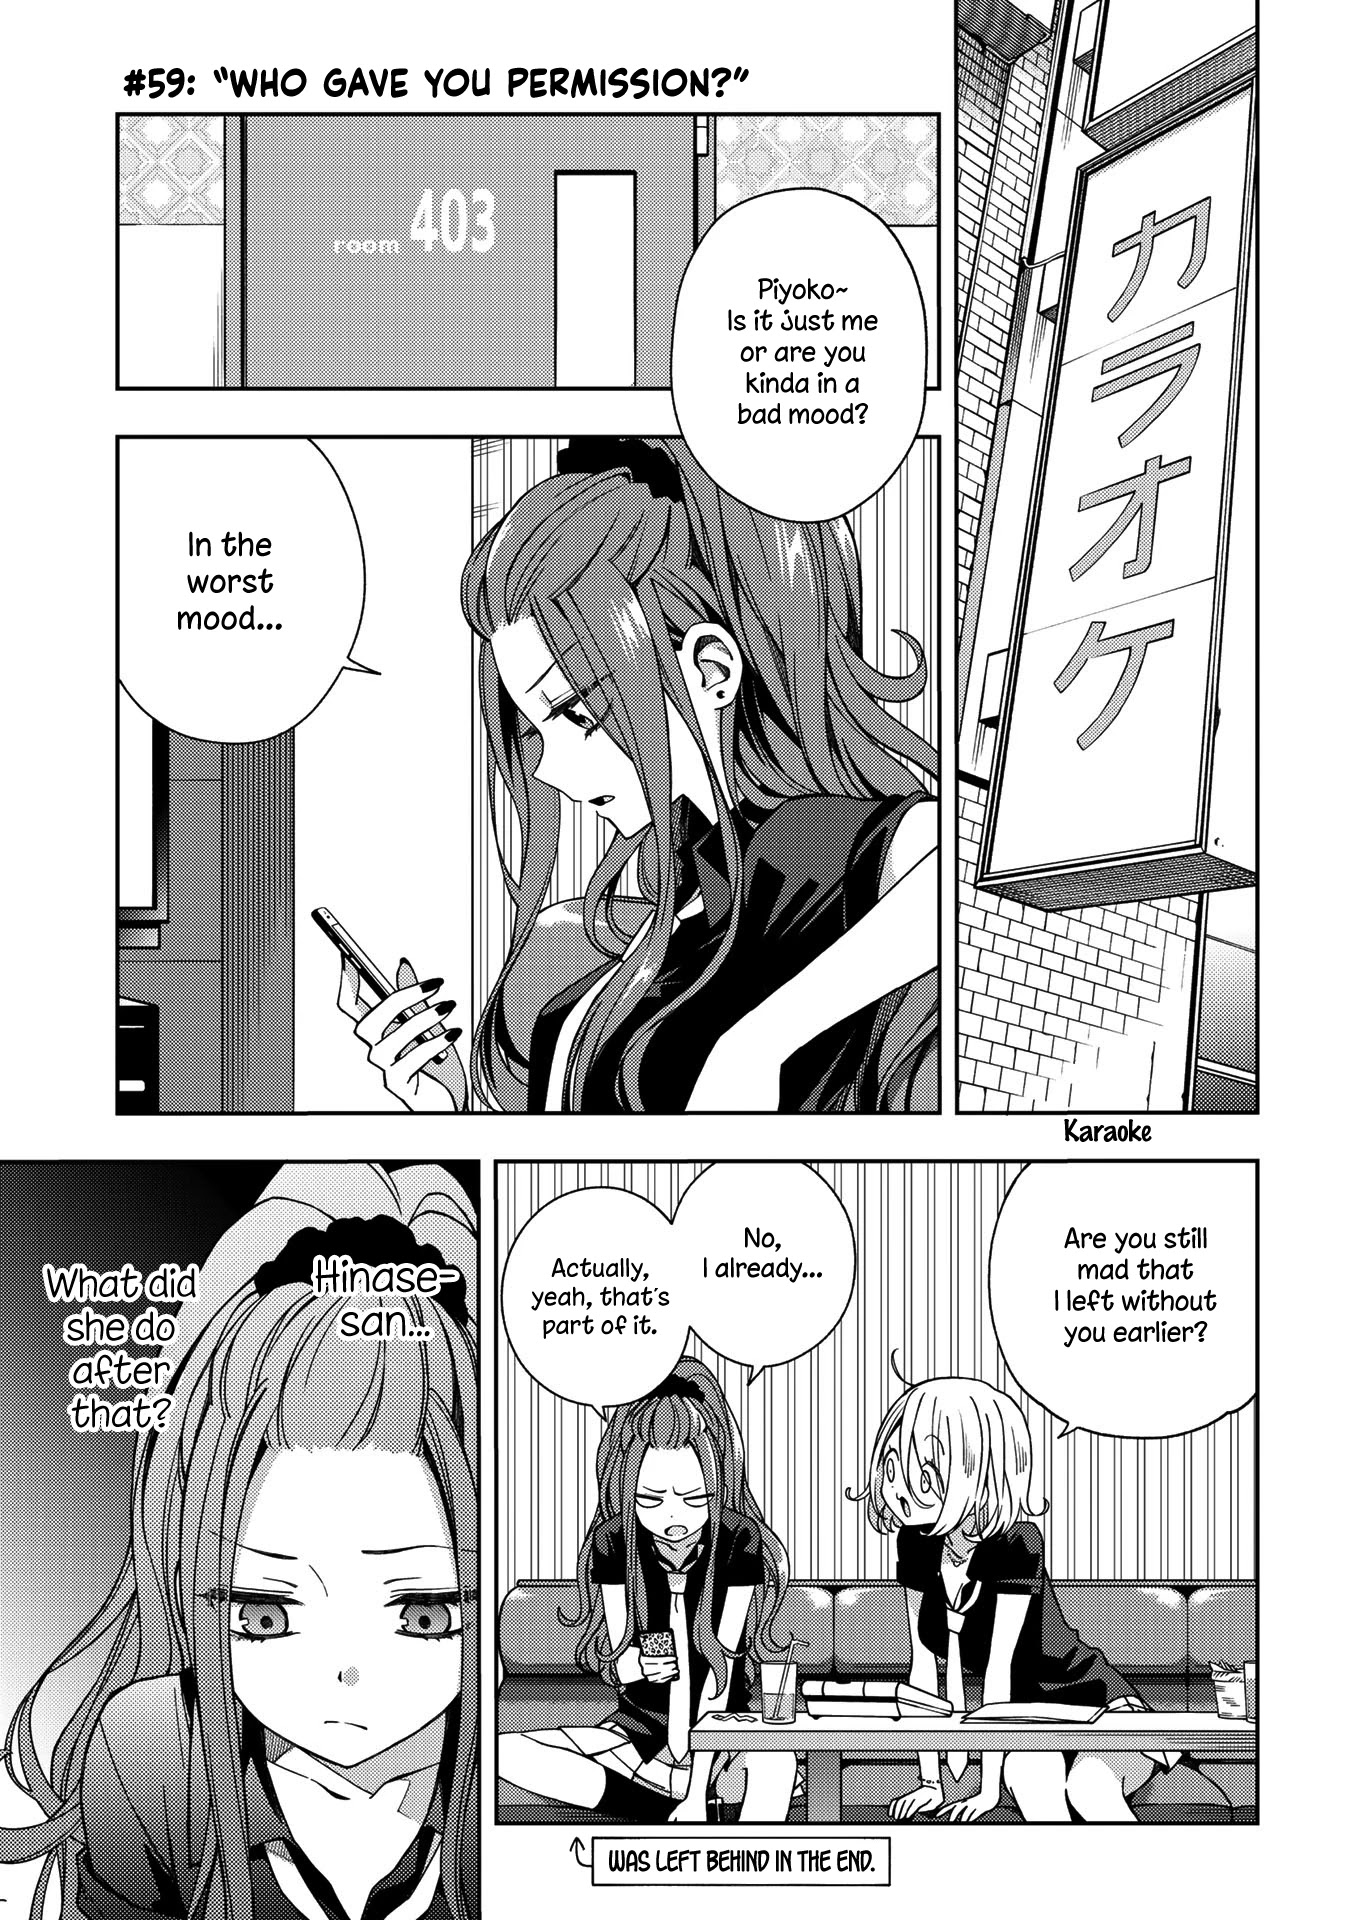 School Zone (Ningiyau) Chapter 59: Who Gave You Permission? - Picture 1